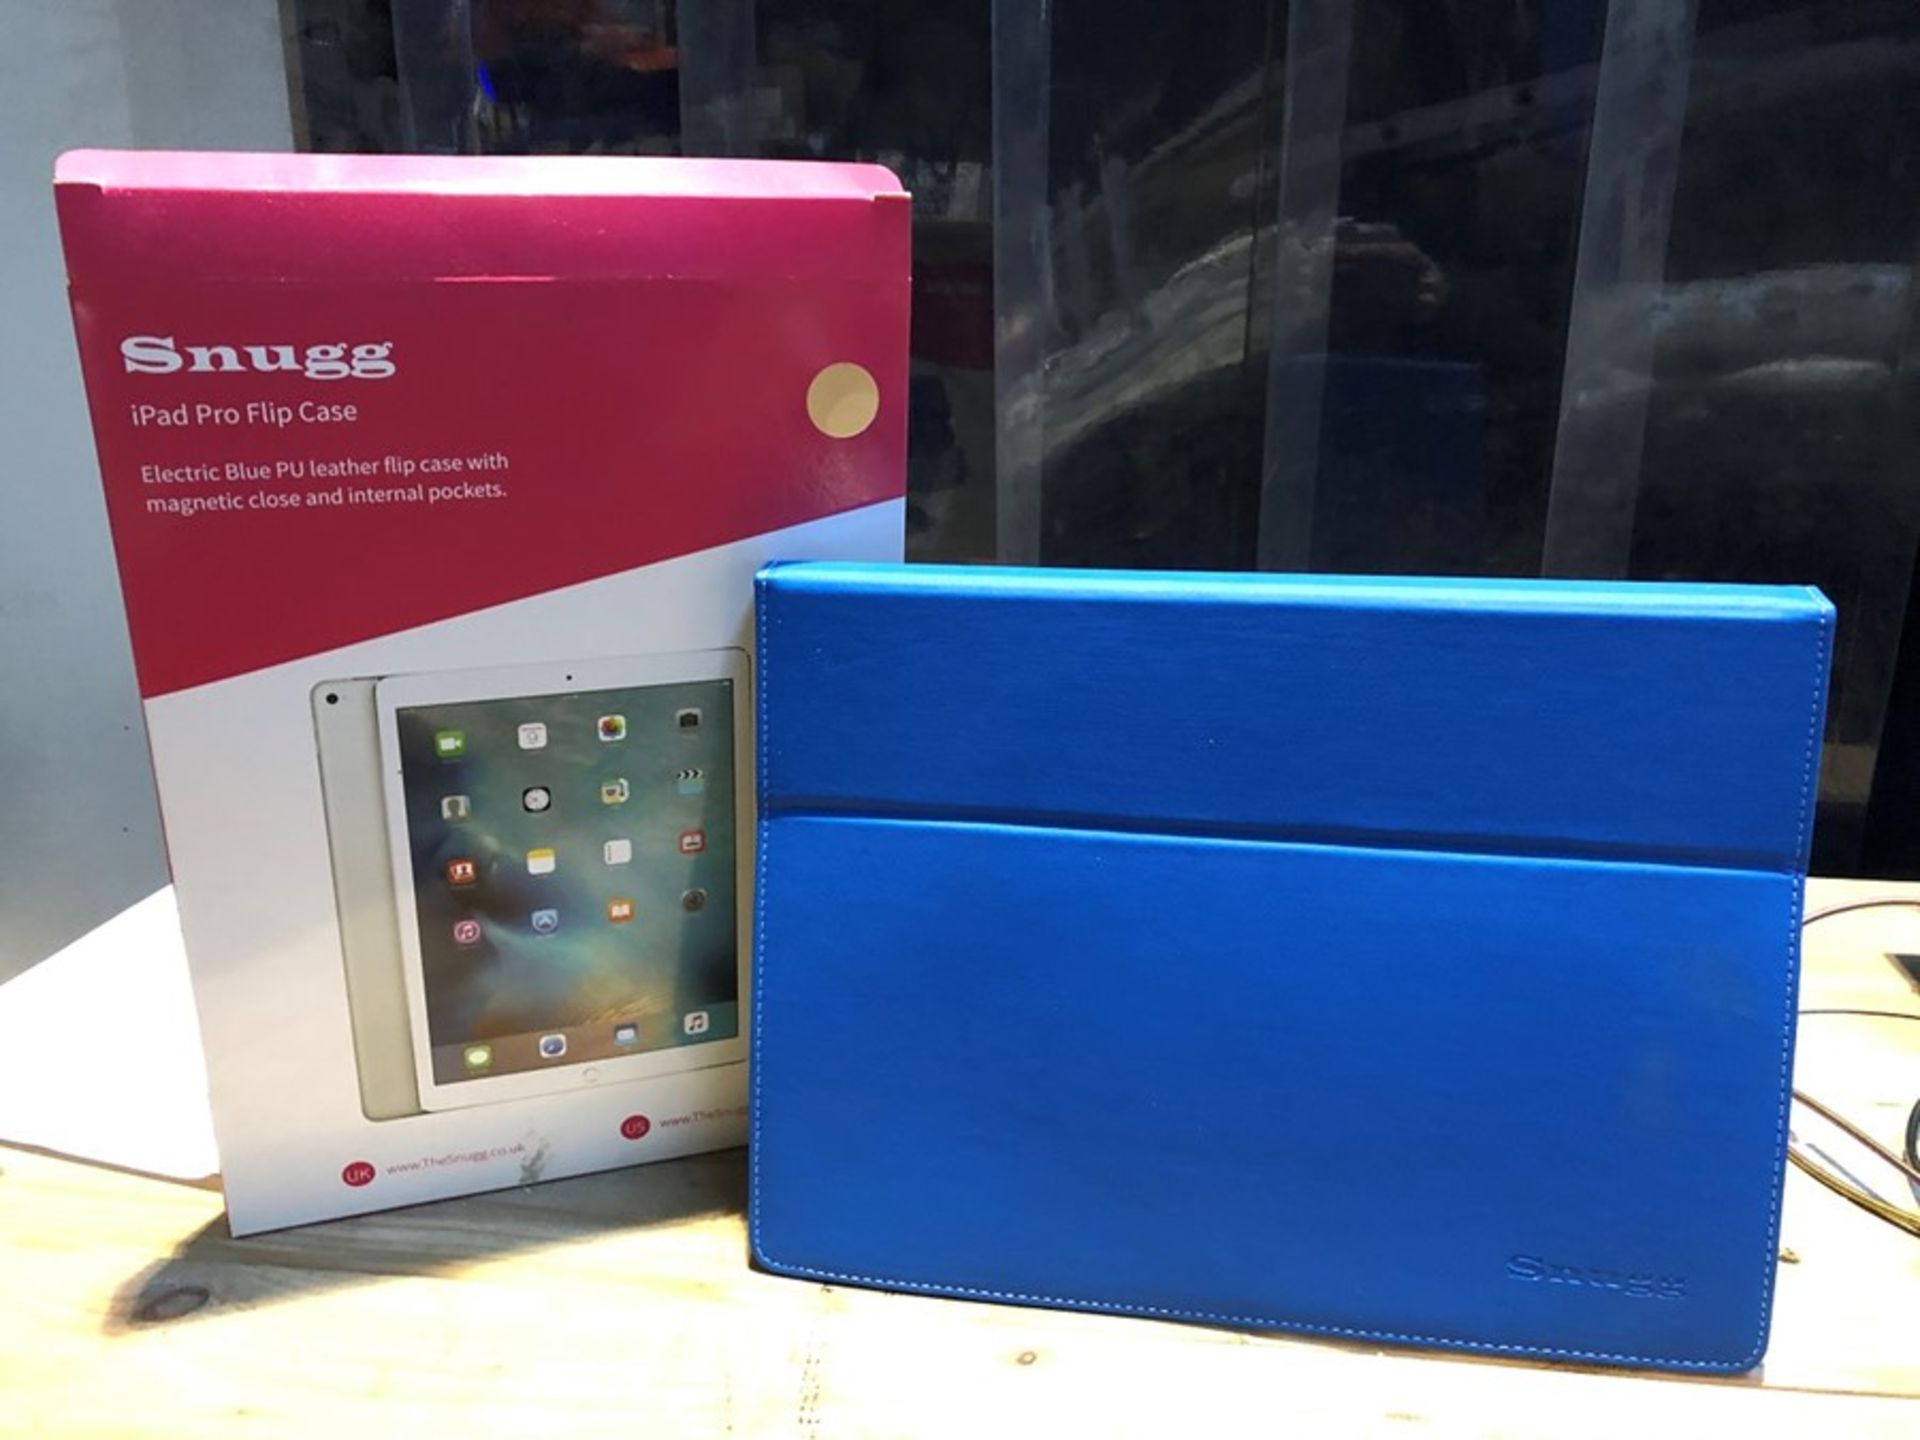 1 LOT TO CONTAIN 5 BOXED SNUGG IPAD PRO FLIP CASE 12.9 INCH IN BLUE / RRP £124.95 (PUBLIC VIEWING